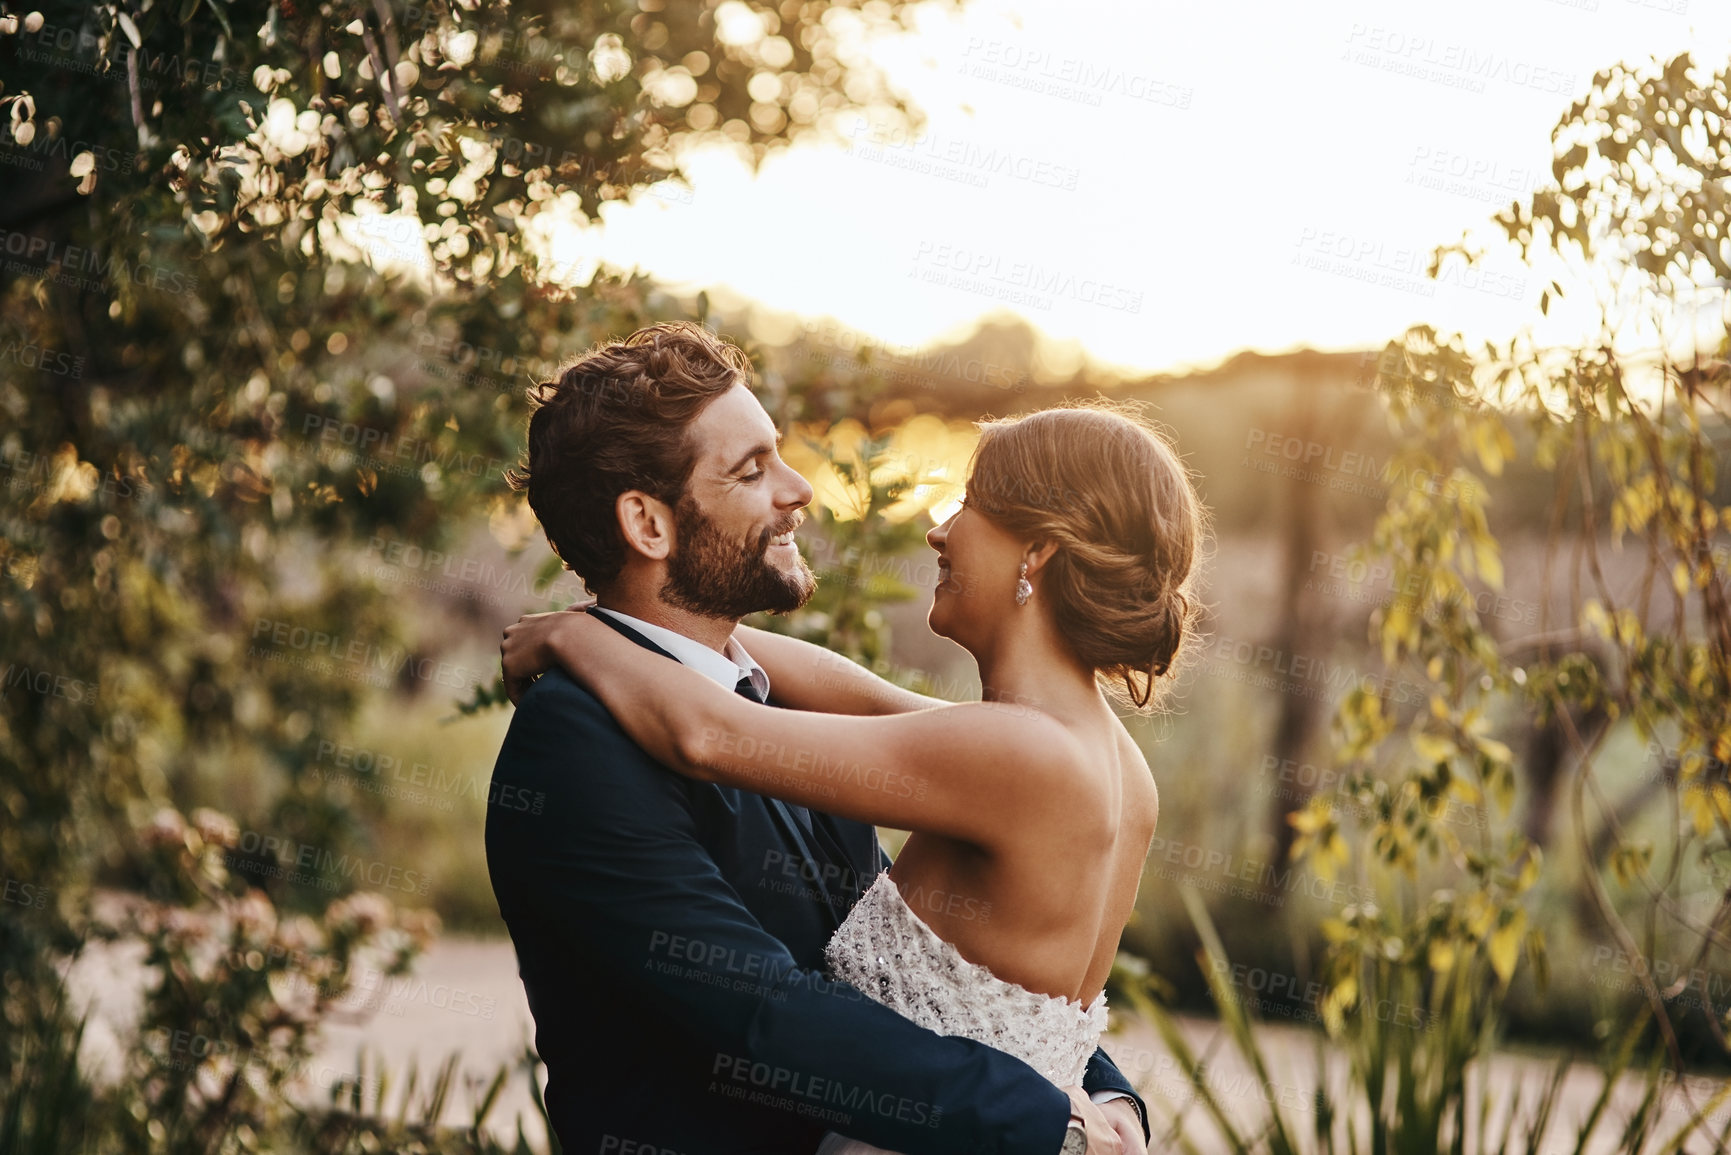 Buy stock photo Happy married couple, hug and smile for wedding, marriage or commitment in relationship together in nature. Groom and bride hugging, smiling and embracing love, vows or honeymoon adventure outside